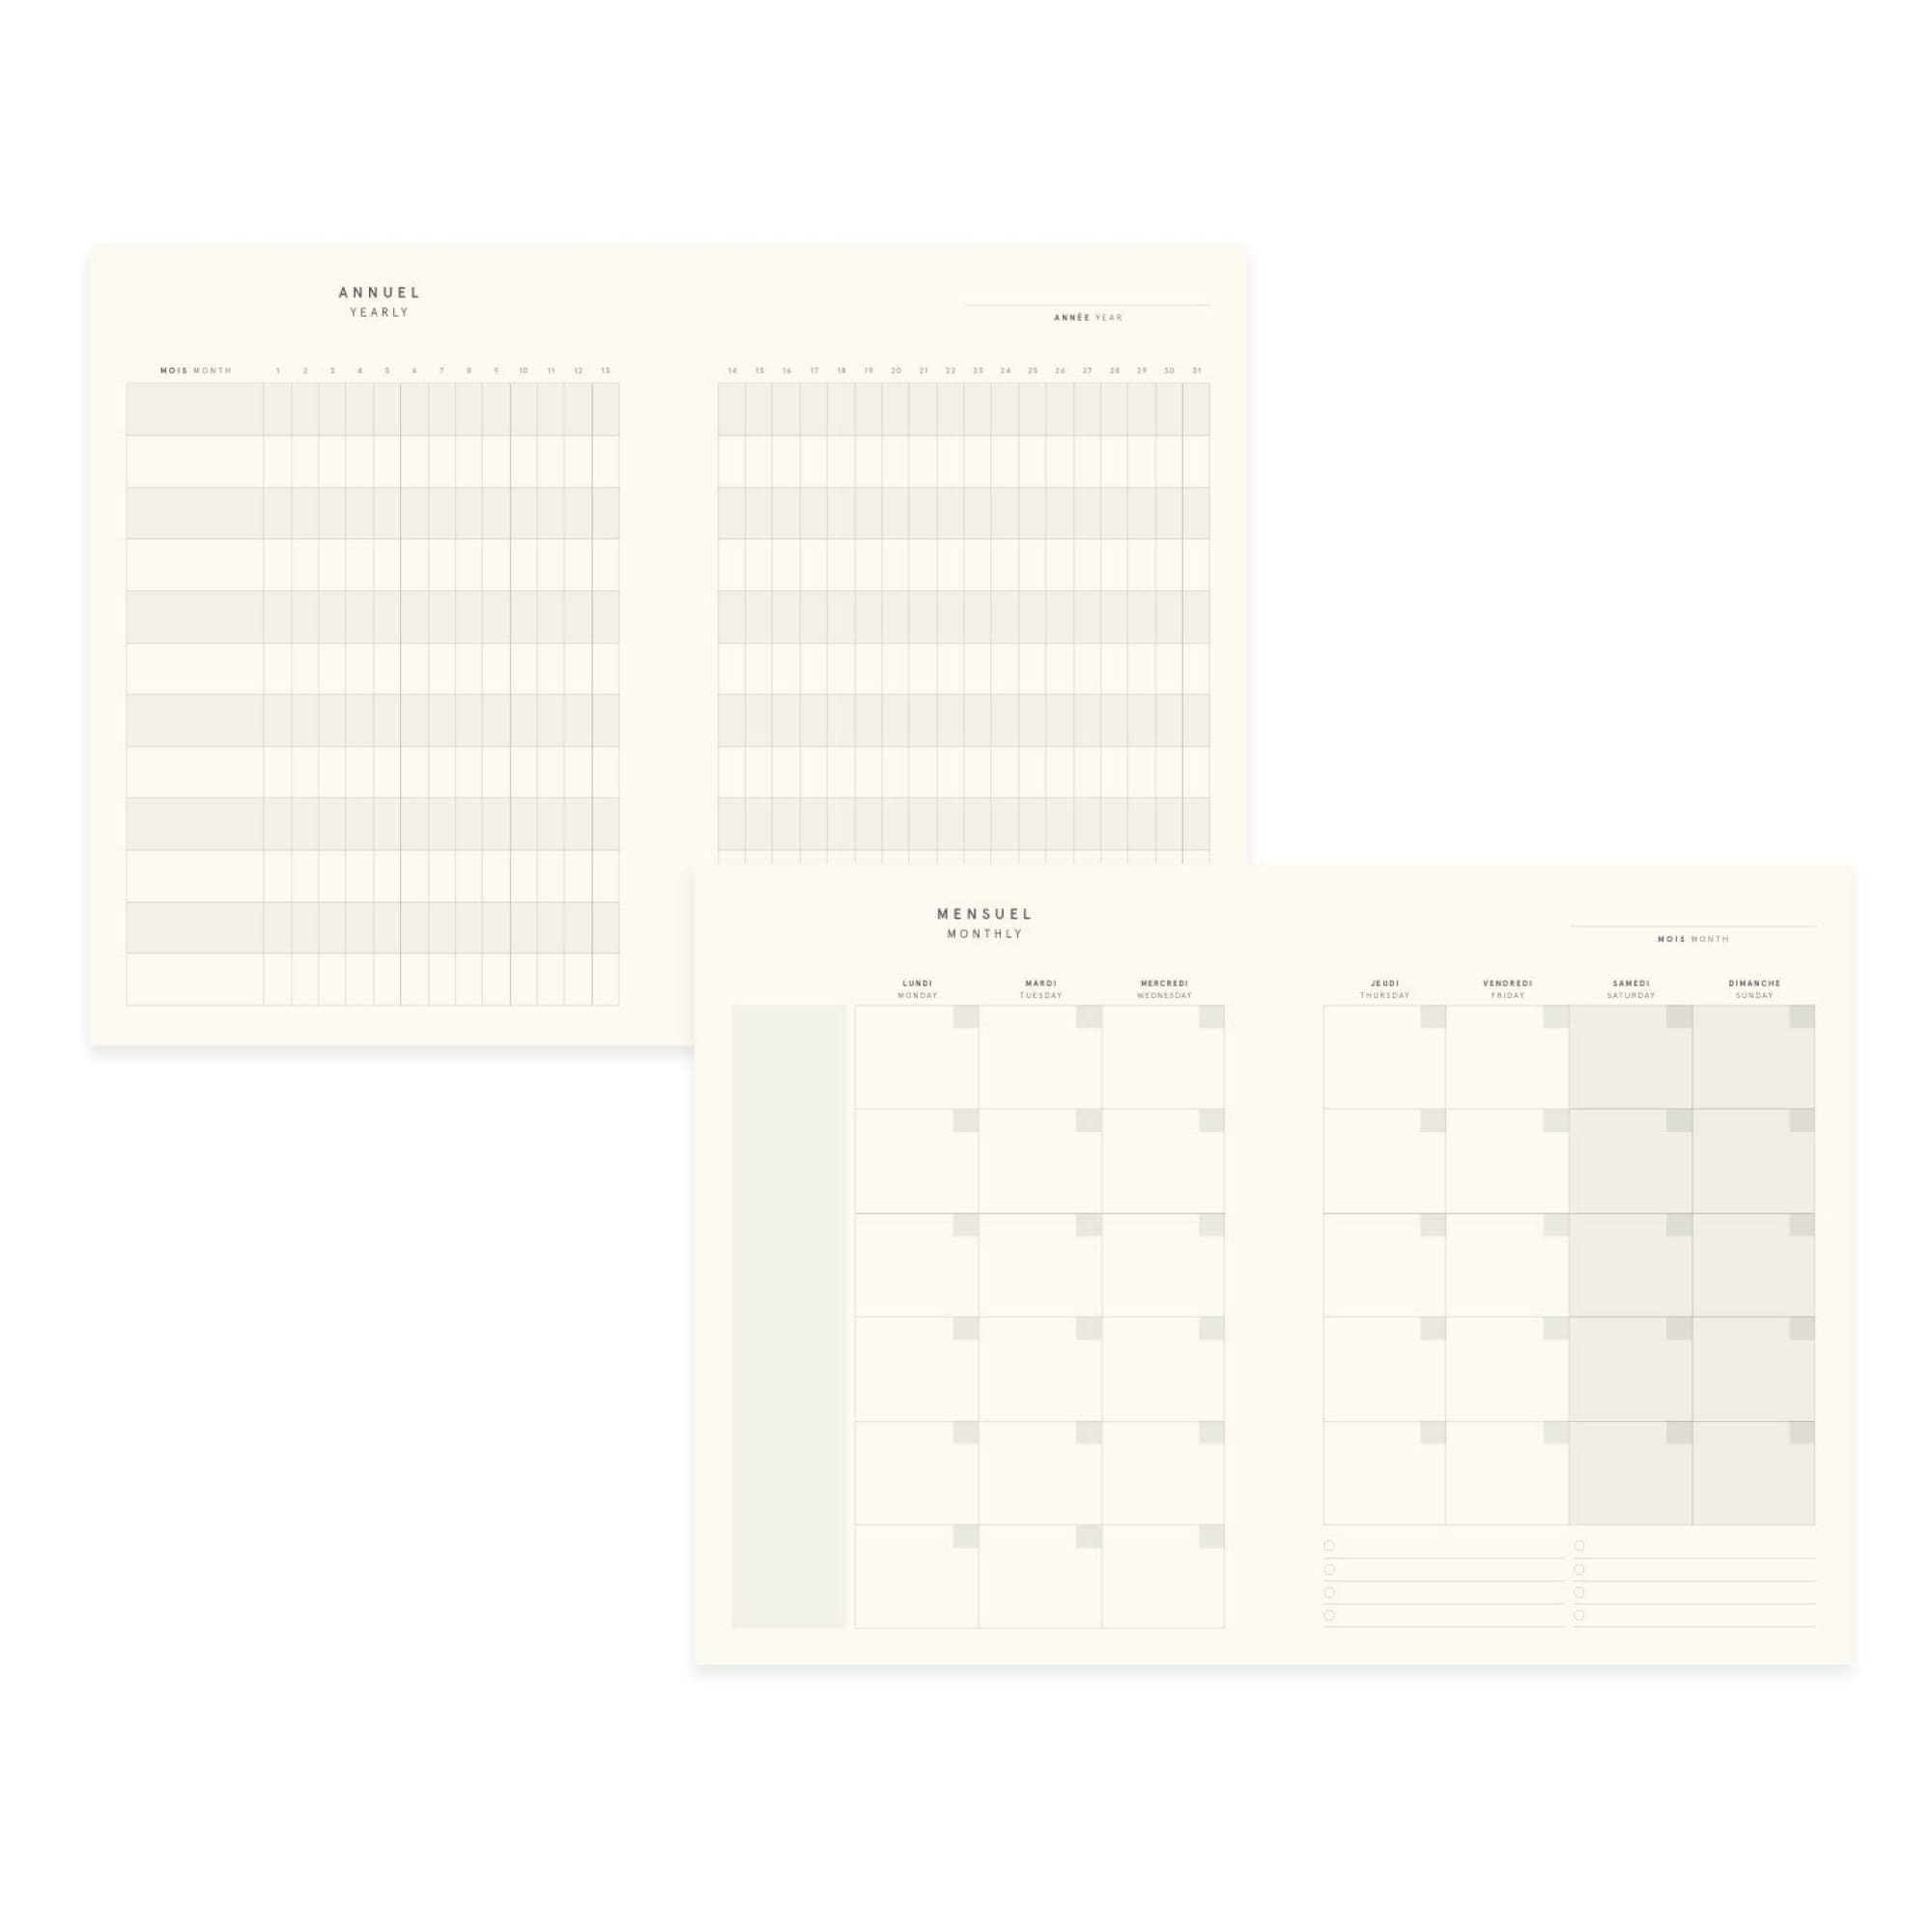 Annual and monthly spreads of the Grey Cloth-covered Undated Planner from The Baltic Club